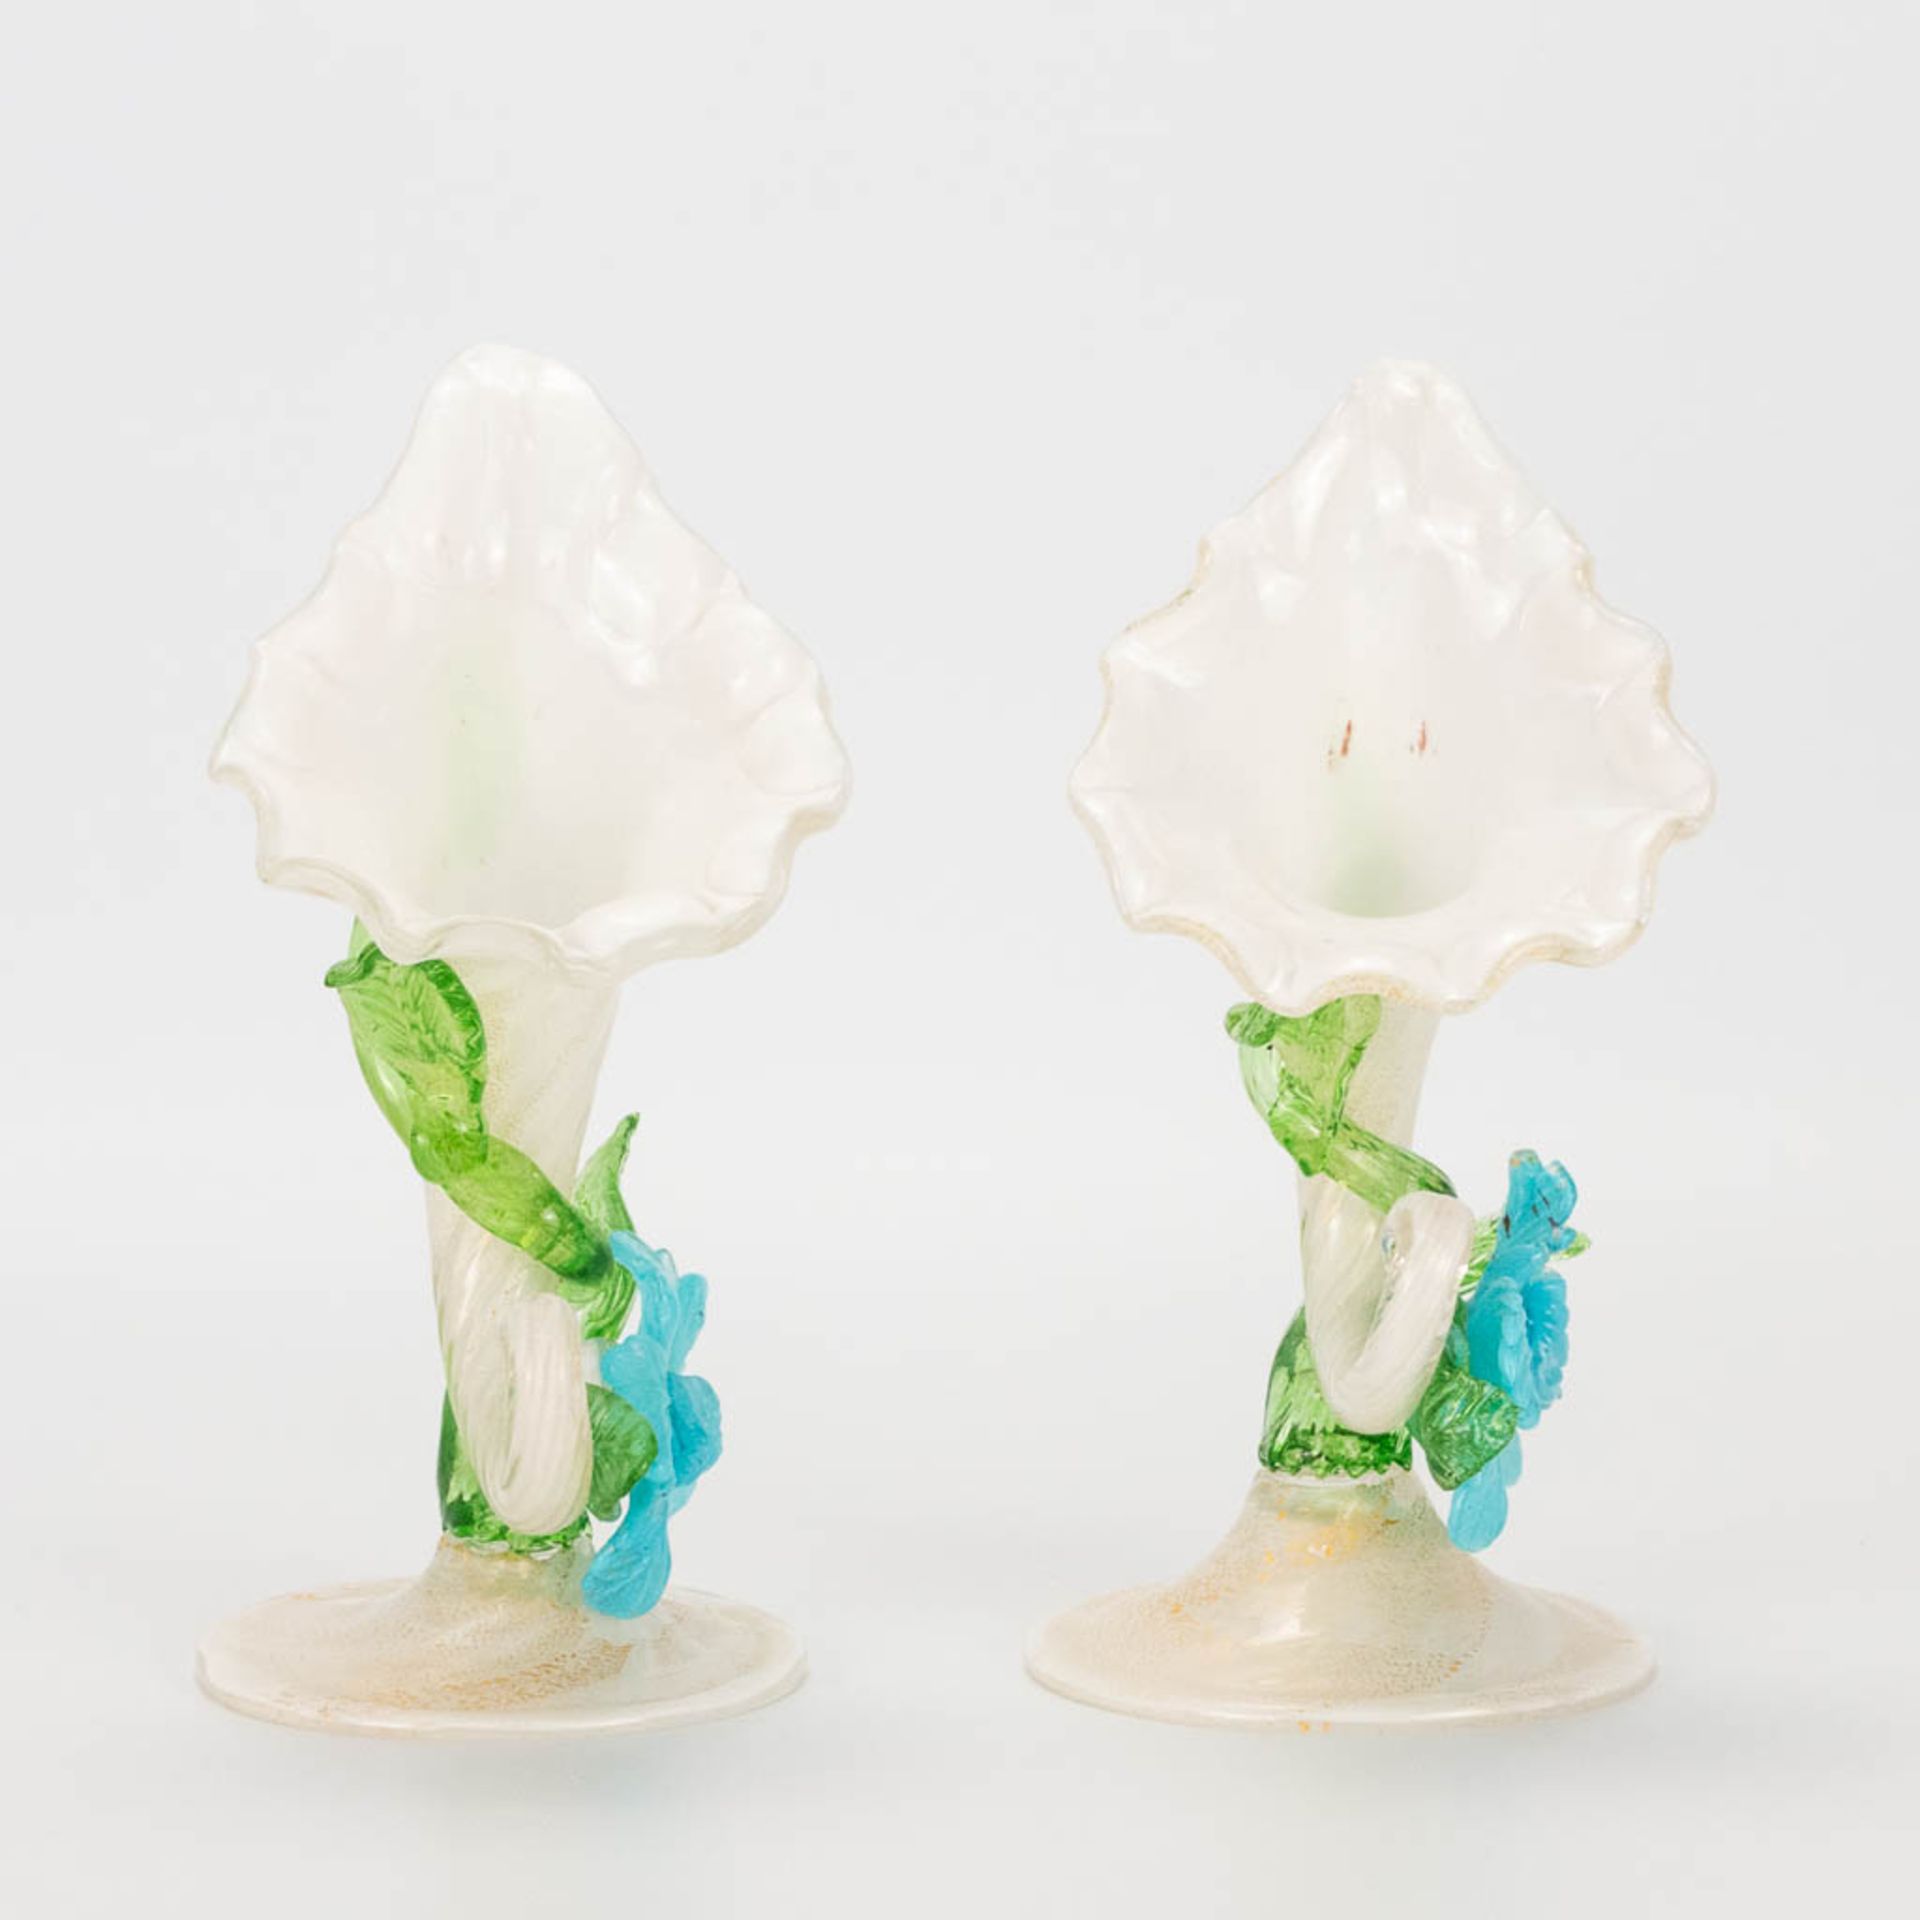 A pair of hand-made display vases in the shape of a flower, made in Murano, Italy. (9,5 x 20 x 9 cm)